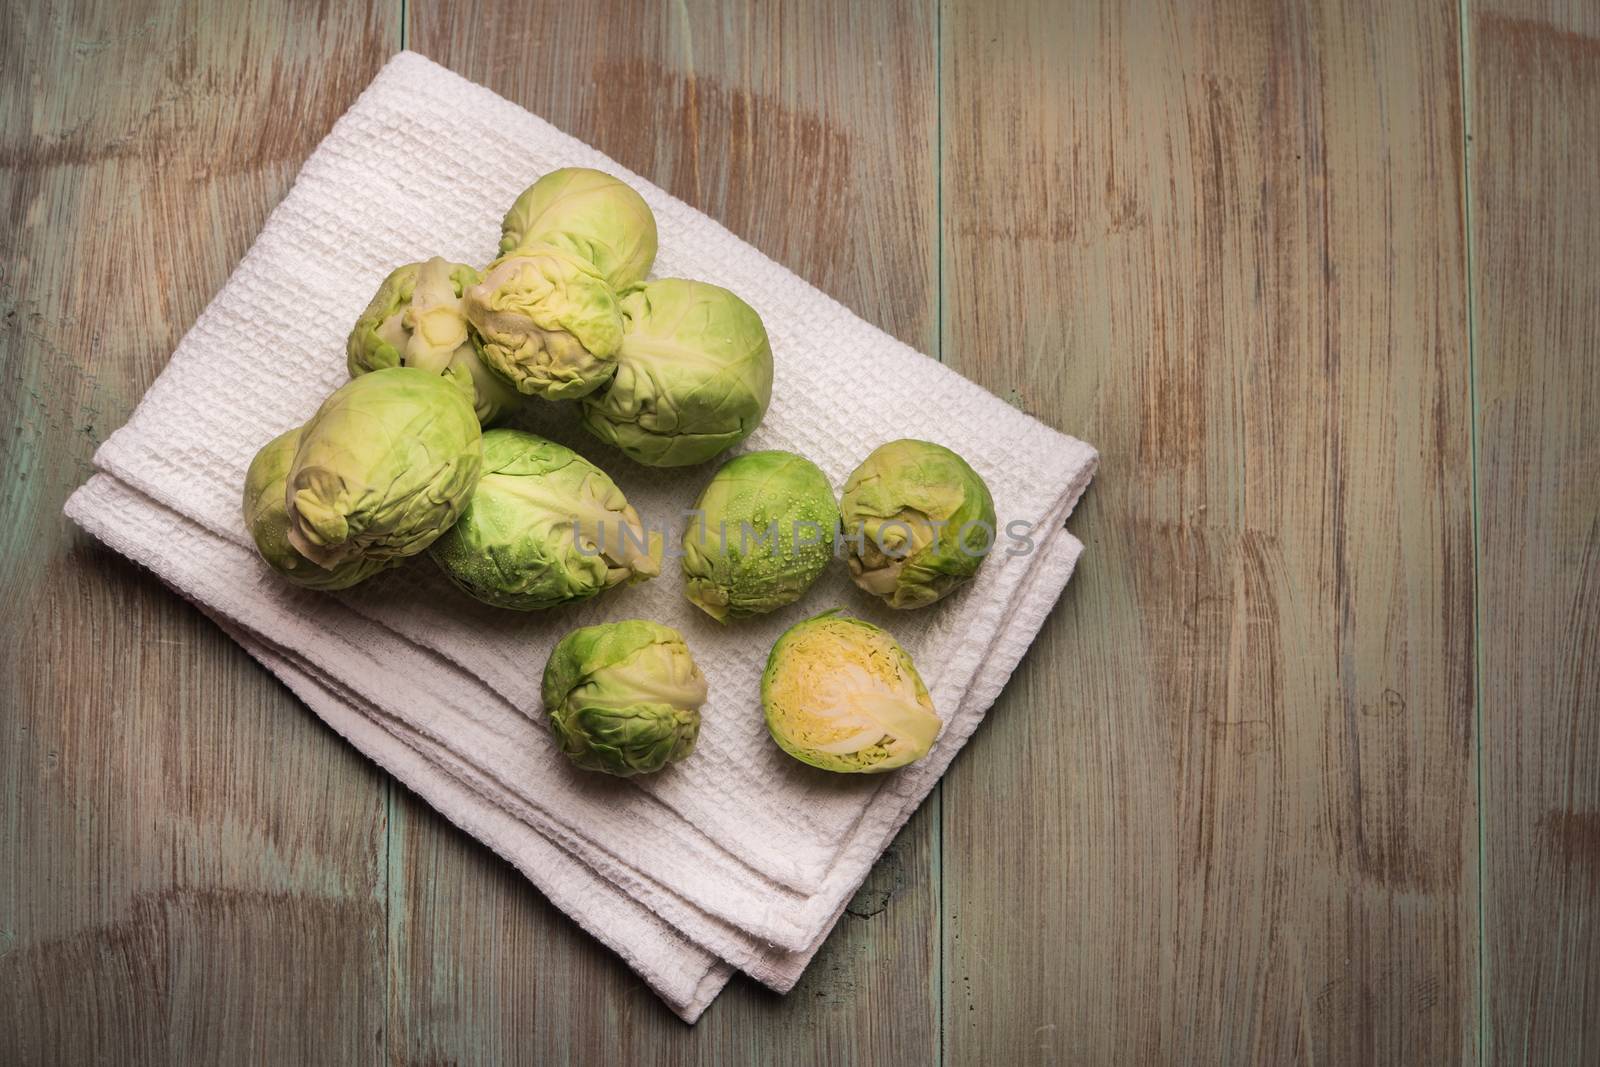 Fresh brussel sprouts over rustic wooden texture. Top view with  by AnaMarques